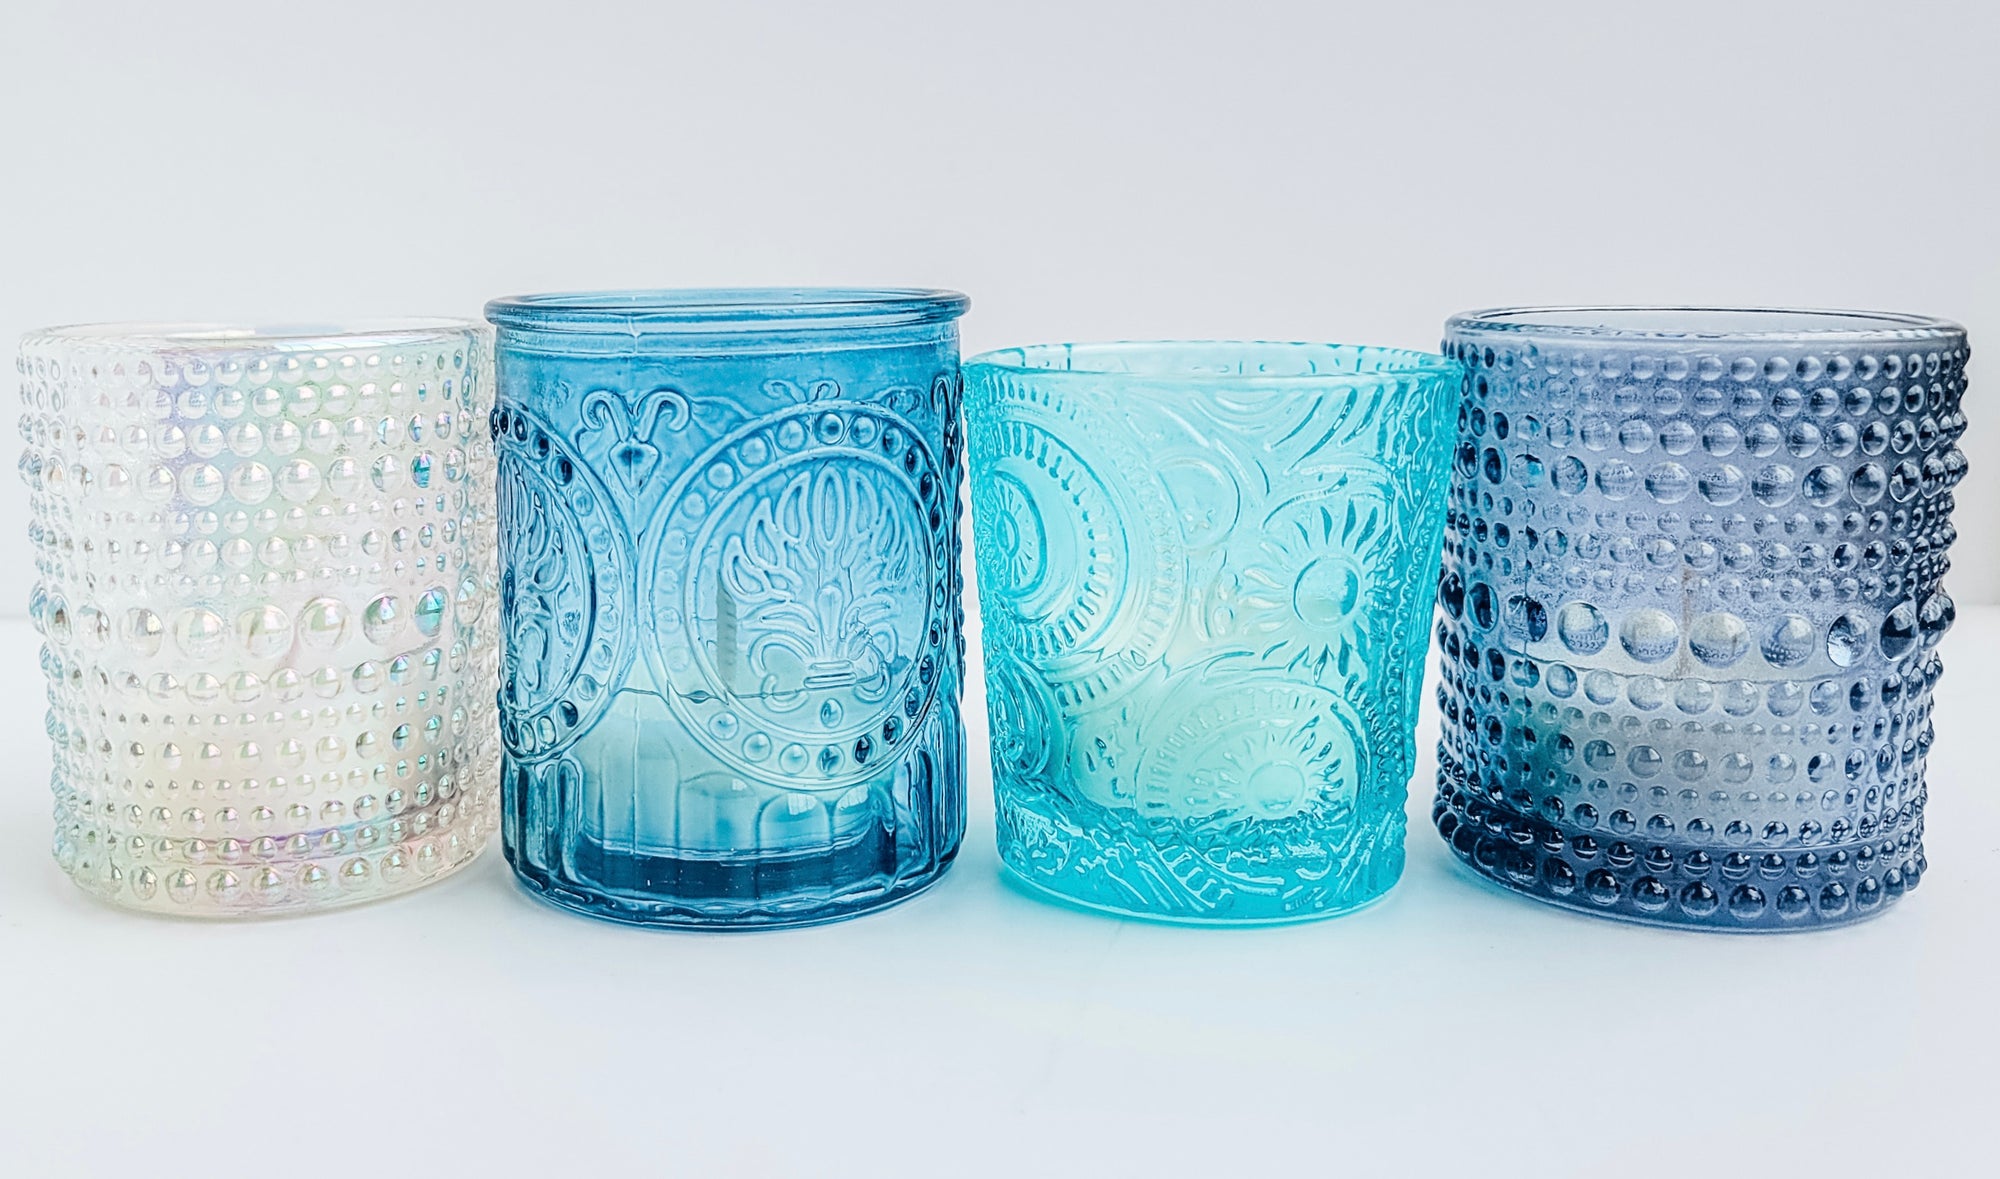 The Beach Tealight Candle Variety Pack is the best way to try many scents at once. Includes a variety of coastal scents.